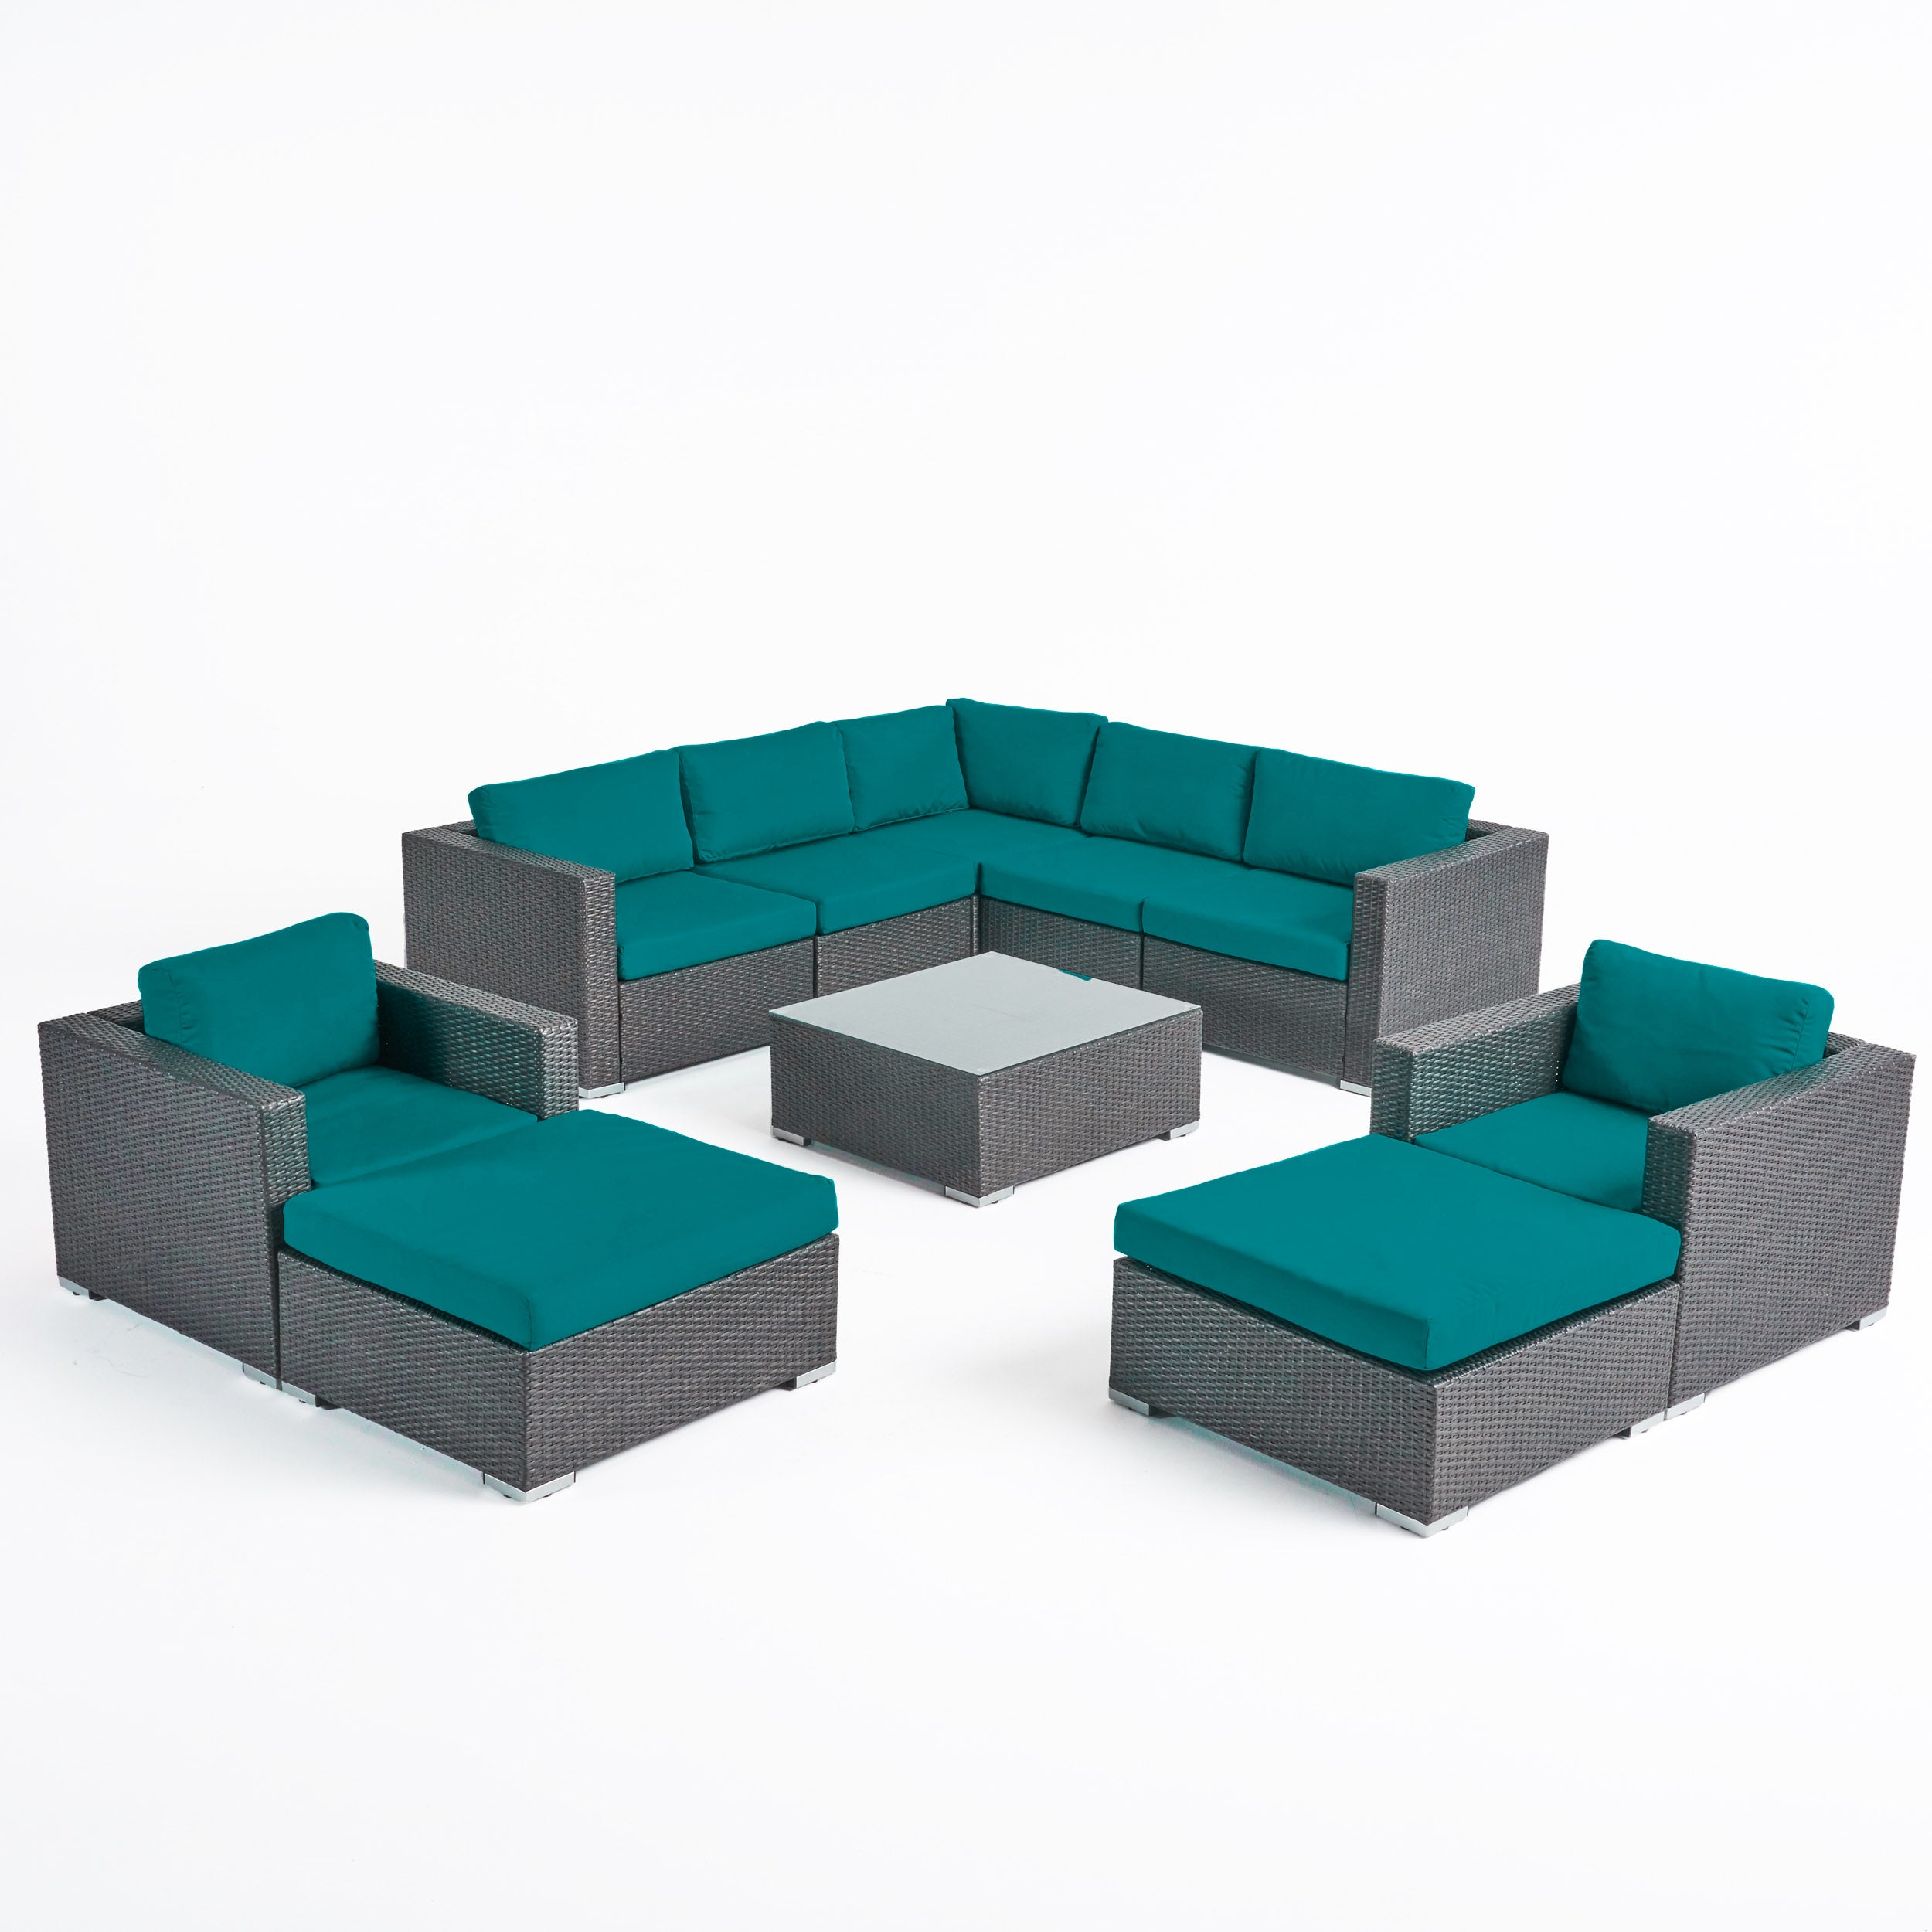 Kyra Outdoor 7 Seater Wicker Sectional Sofa Set with Sunbrella Cushions Gray Canvas Teal